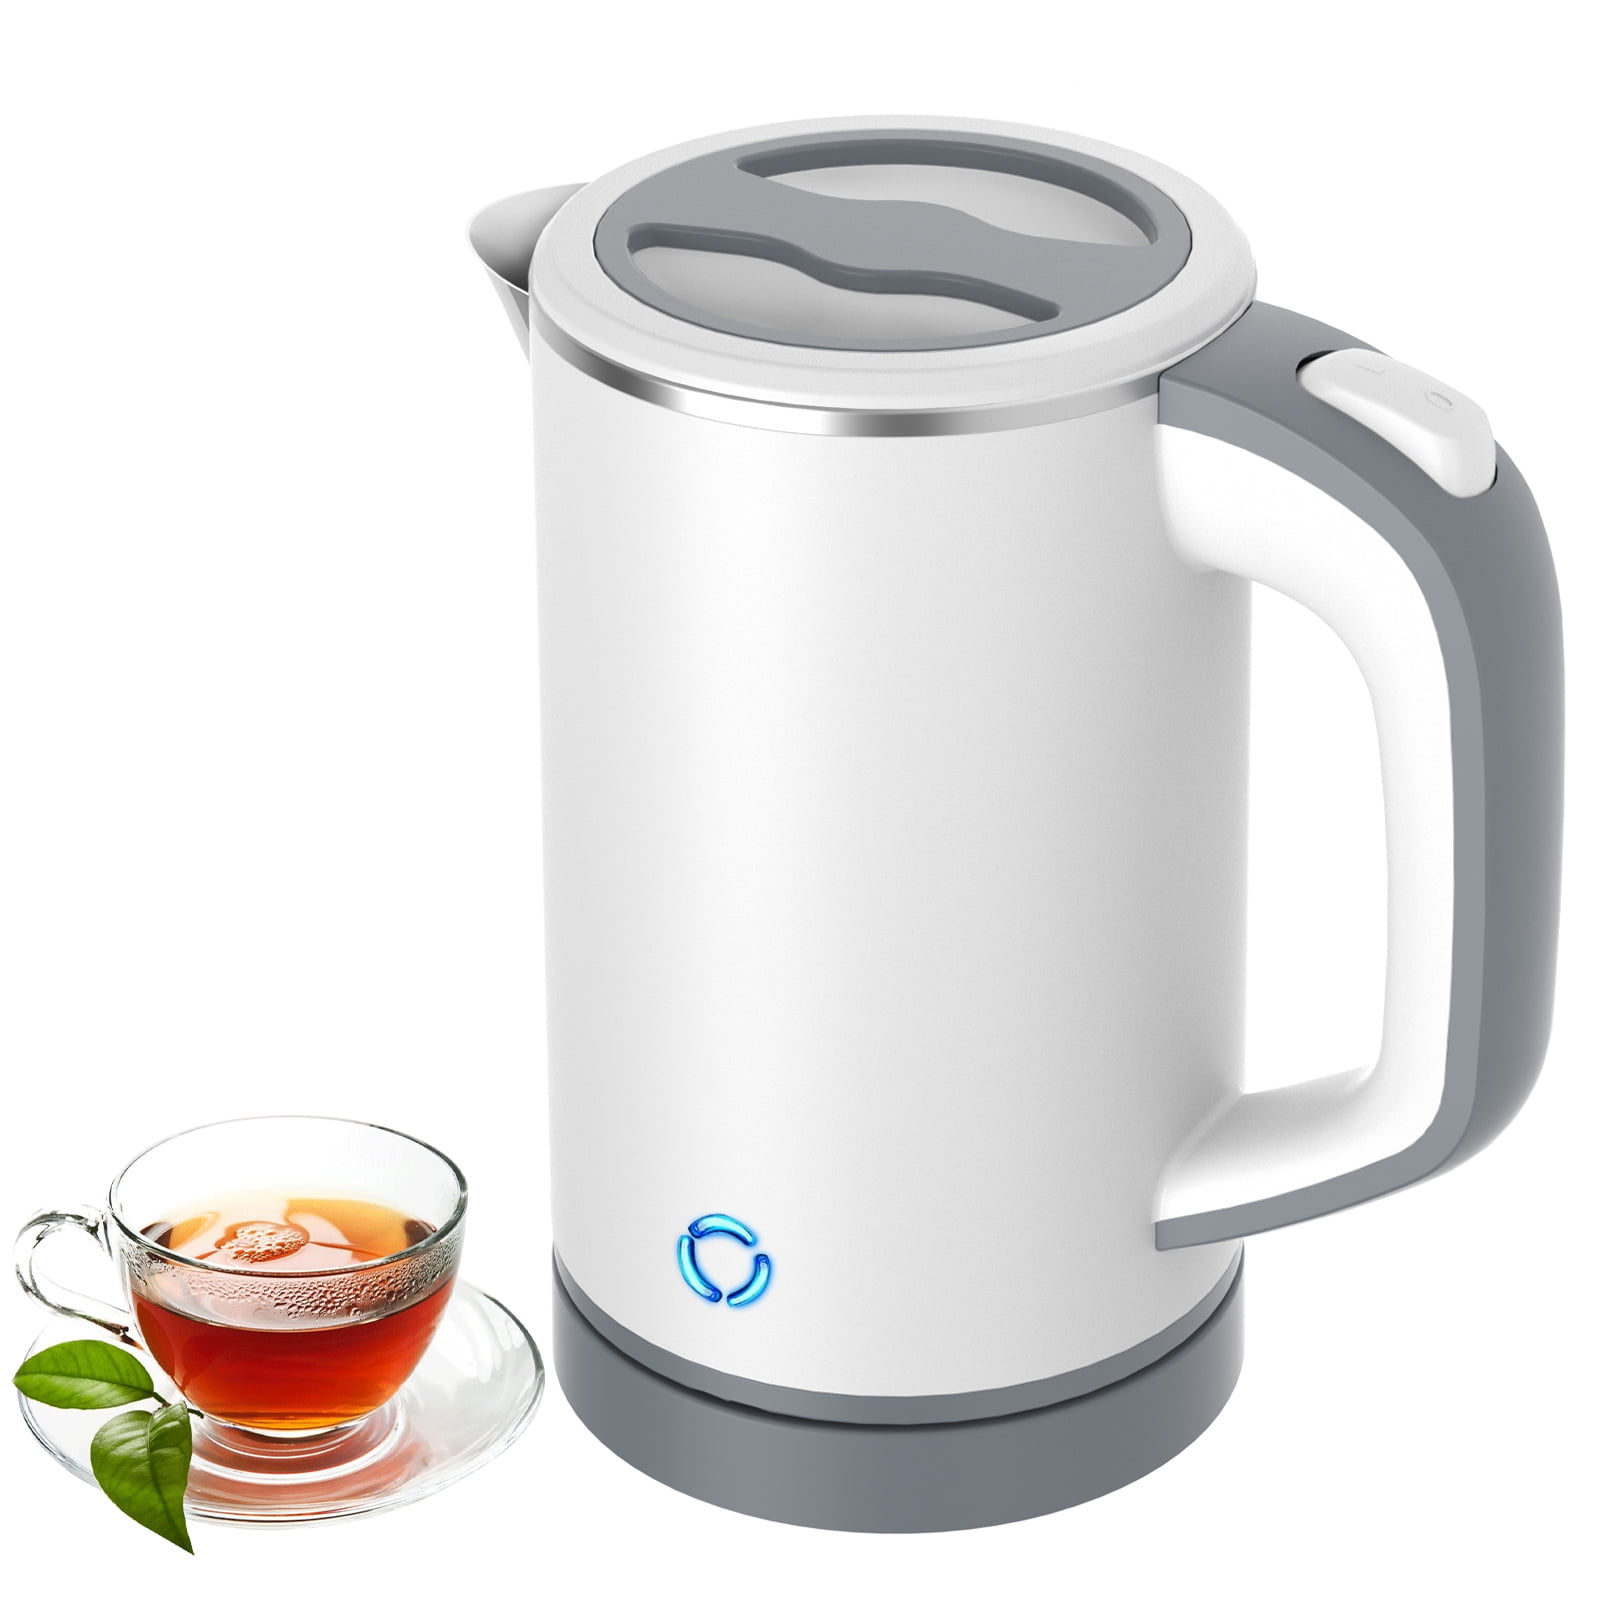  Travel Electric Kettle Anpress Portable Electric Tea Kettle  350ml One Cup Hot Water Boiler Small Electric Kettle Auto Shut Off, 3  Preset Heat Setting, Mini Personal Kettle for Travel and Coffee